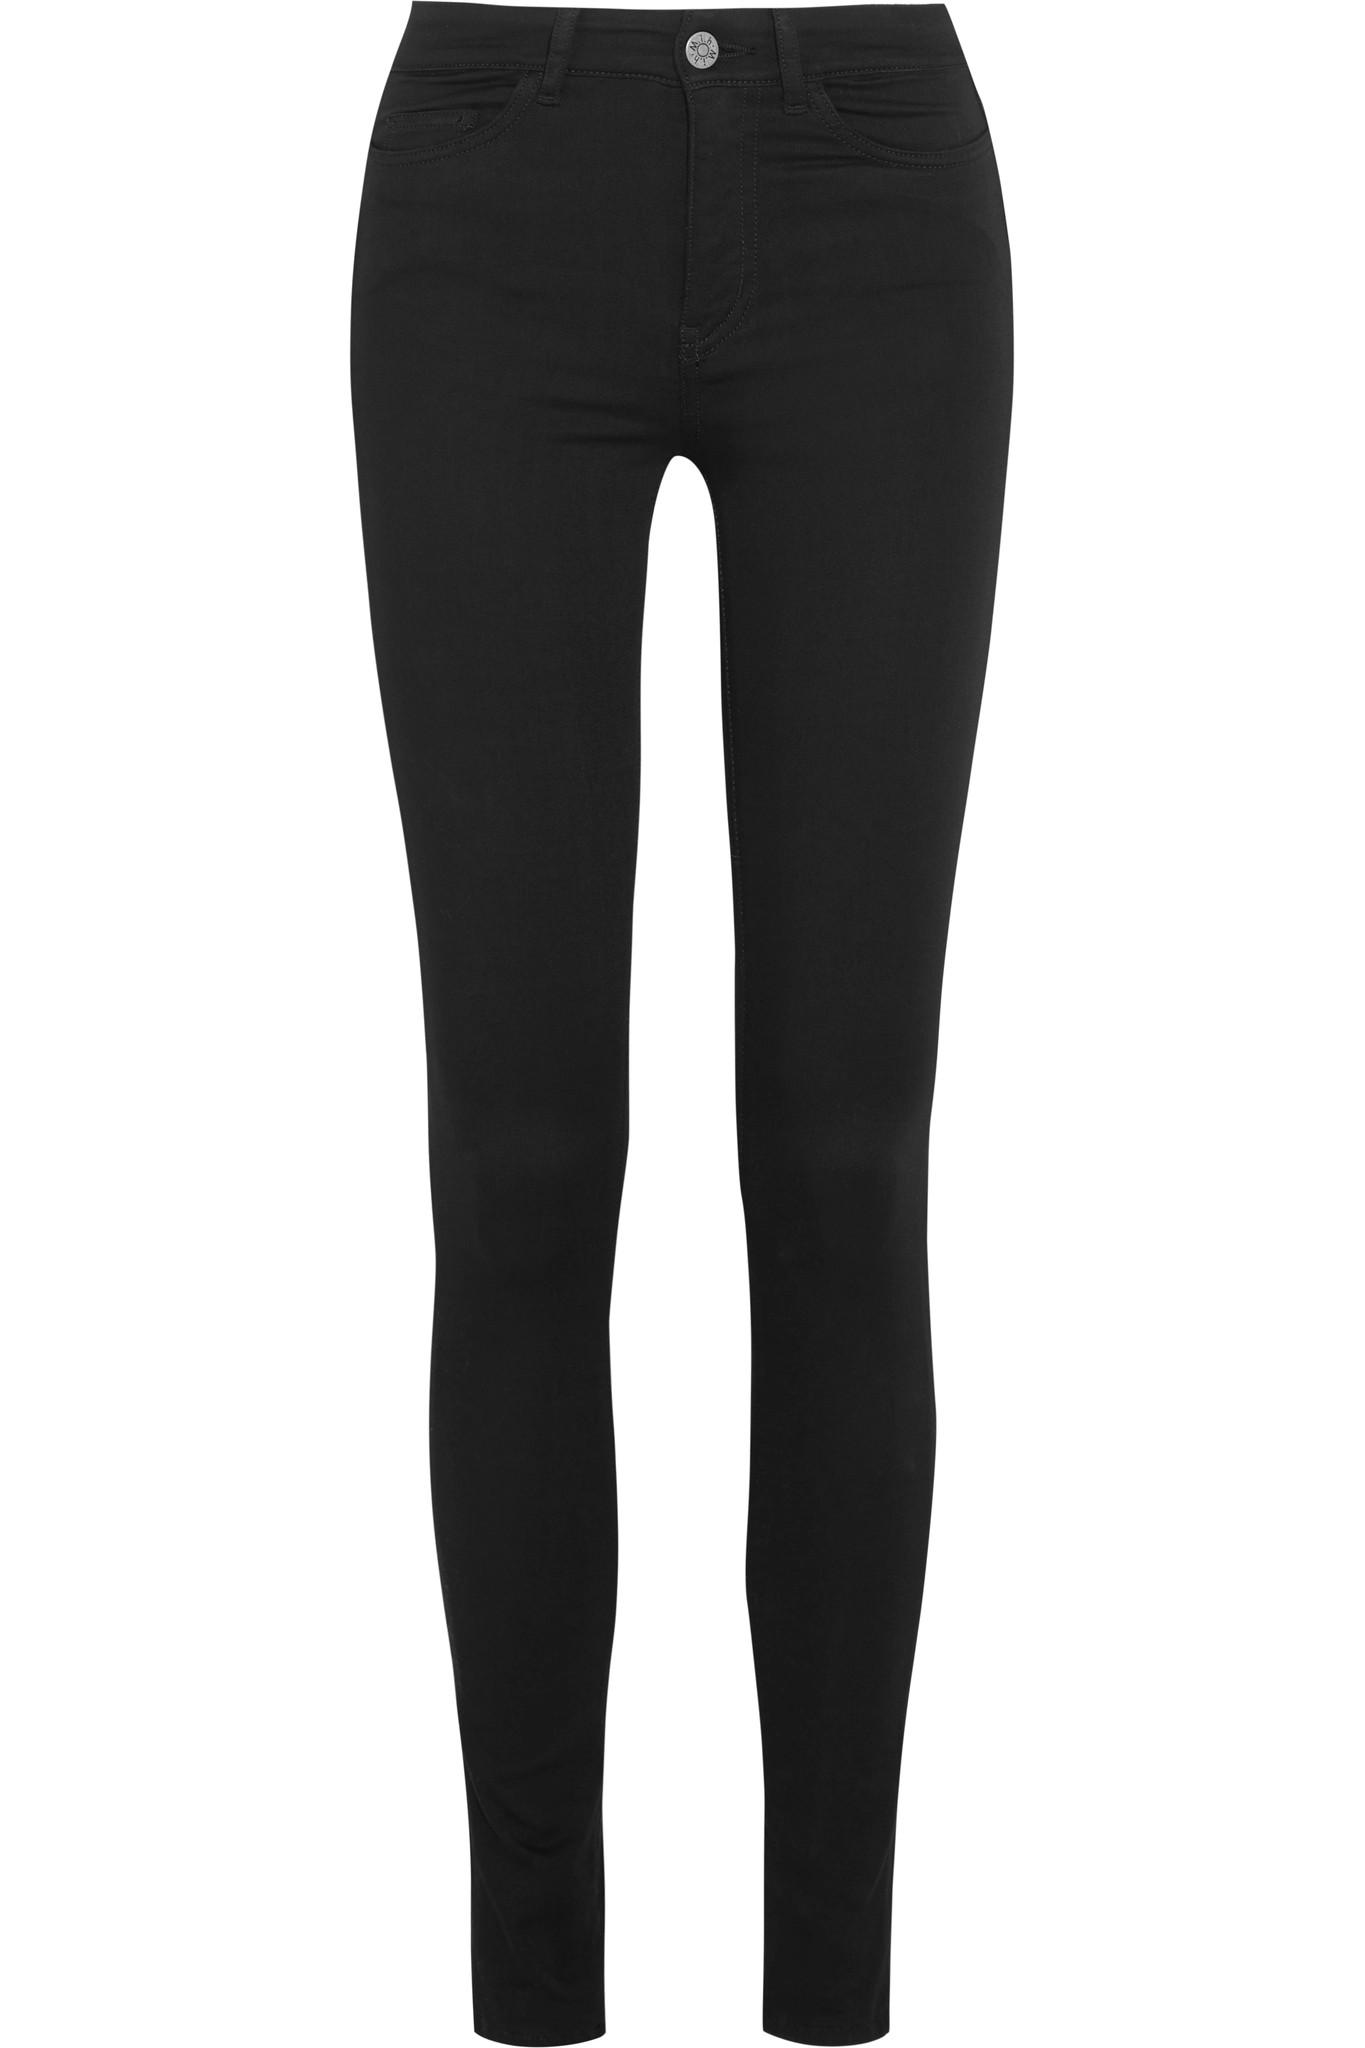 Lyst - M.I.H Jeans Bodycon Mid-rise Skinny Jeans in Black